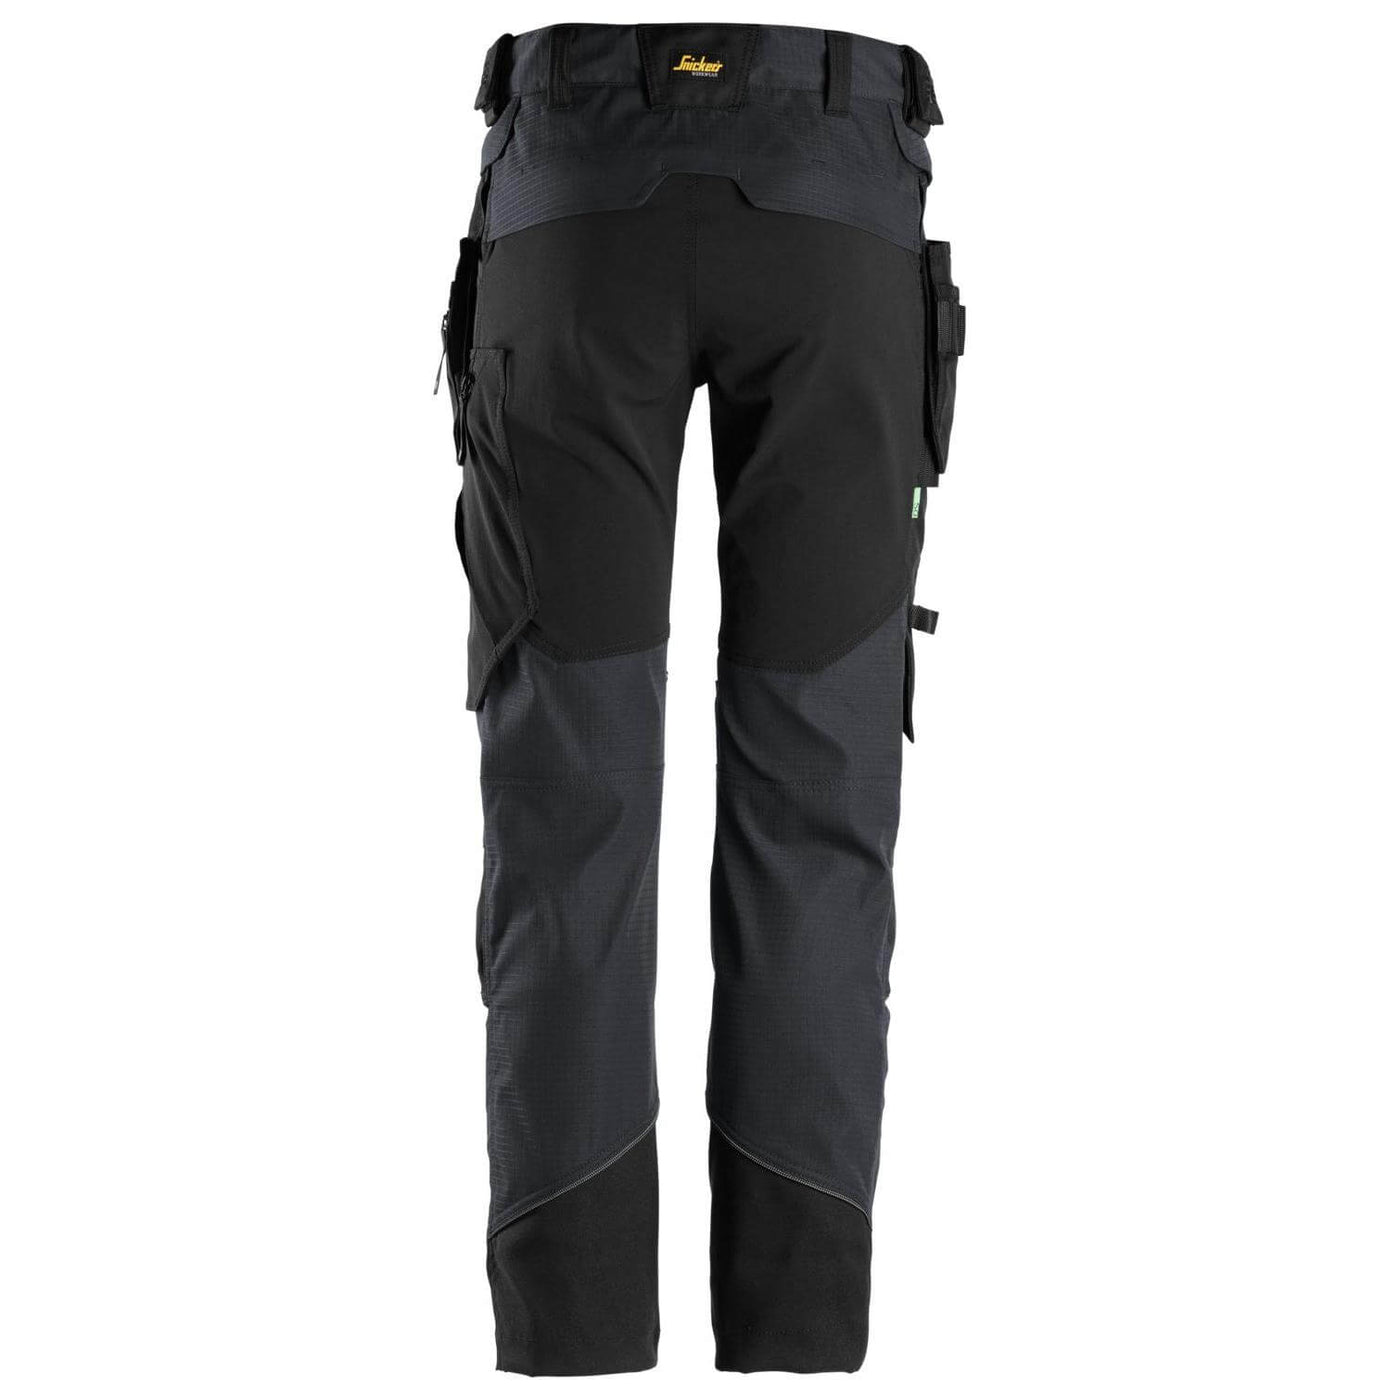 Snickers 6972 Slim Fit Ripstop Work Trousers with Detachable Holster Pockets Steel Grey Black back #colour_steel-grey-black